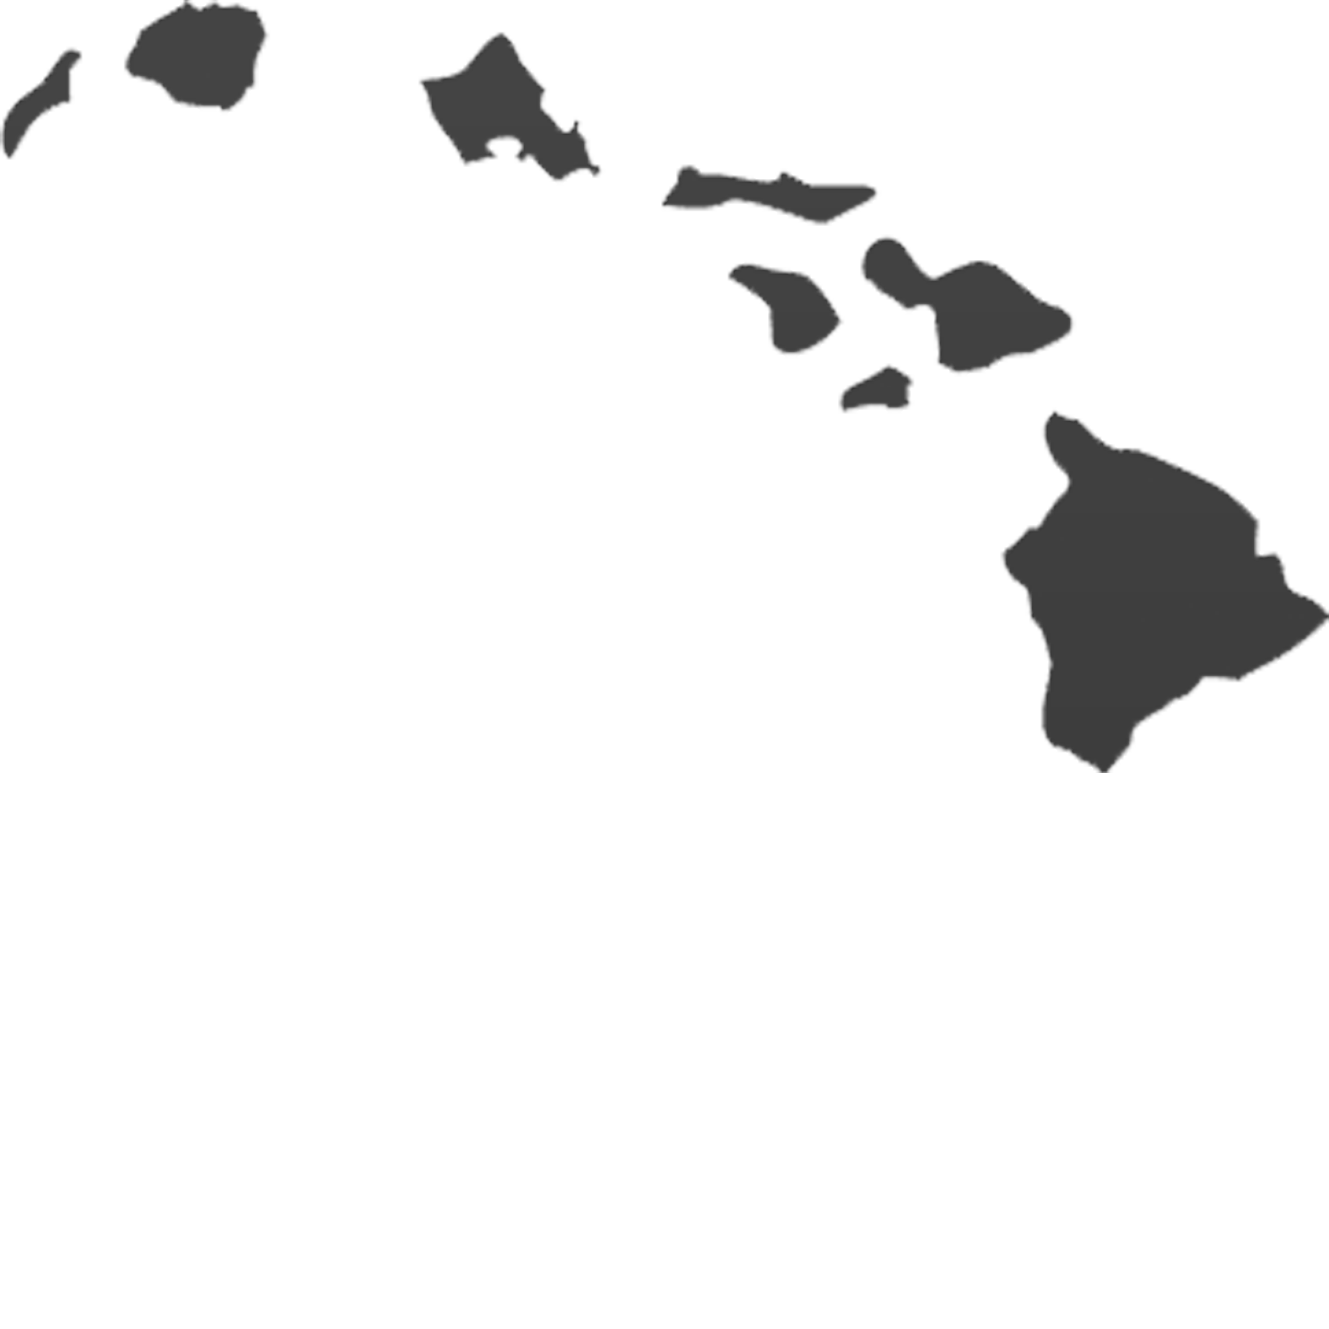 Island clipart island outline.  collection of hawaii